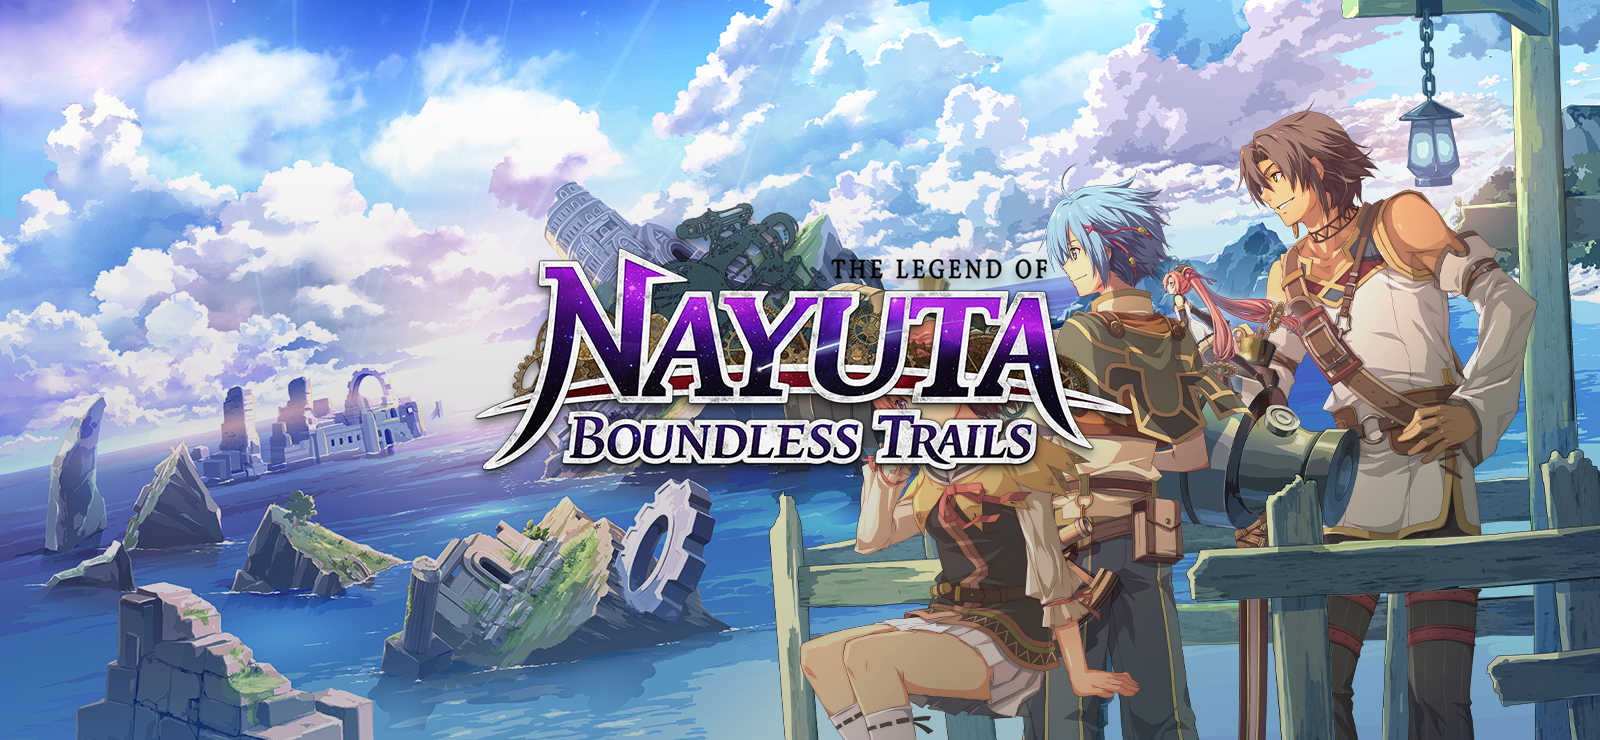 The Legend Of Nayuta: Boundless Trails